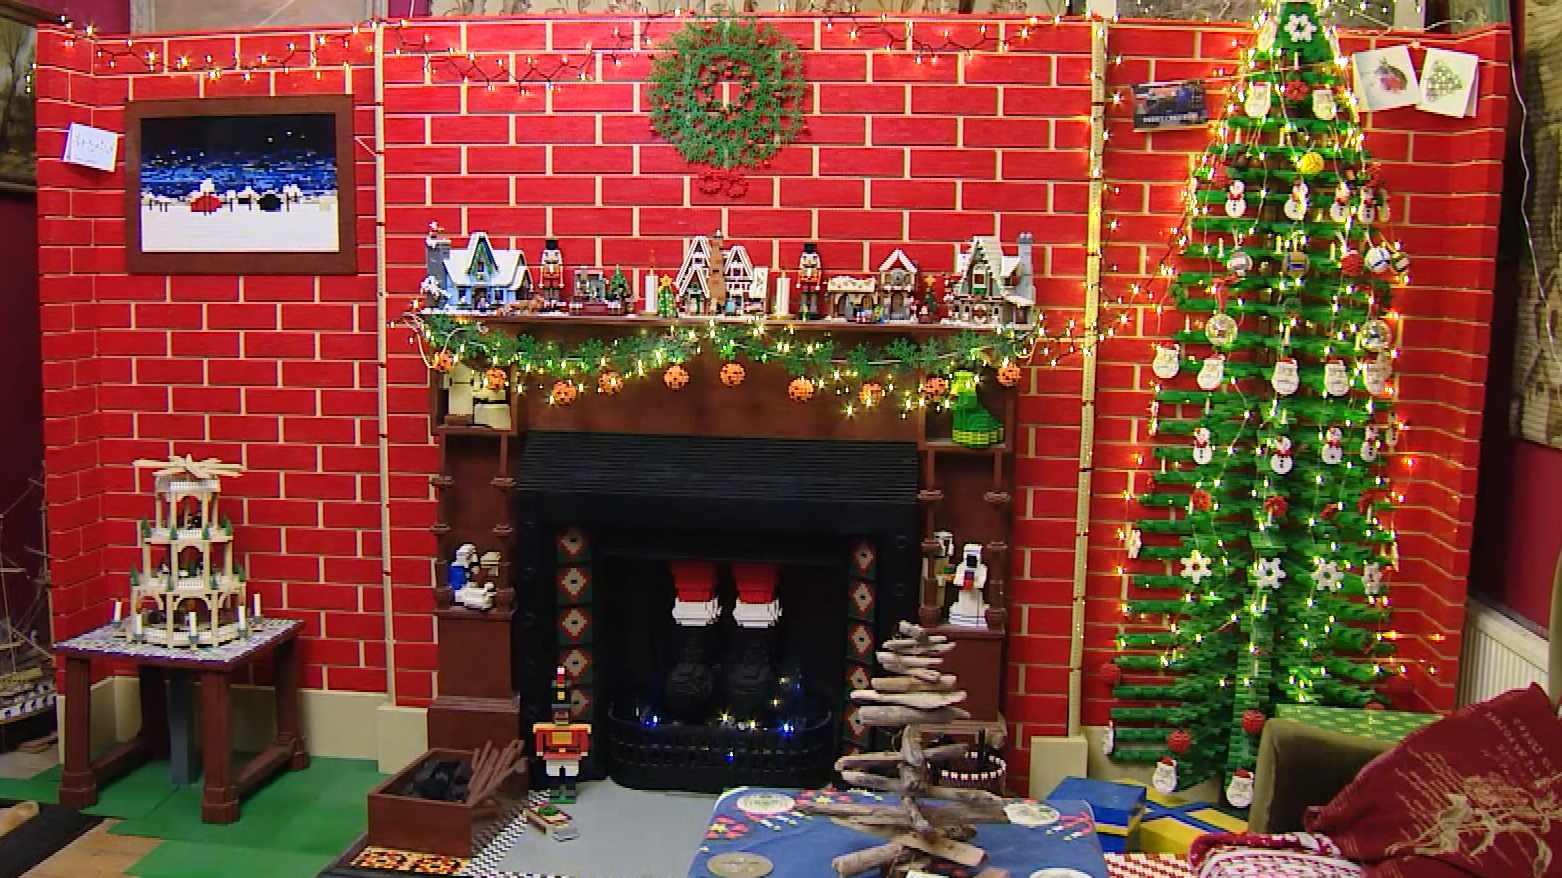 We build a huge Lego display with 400,000 pieces each Christmas